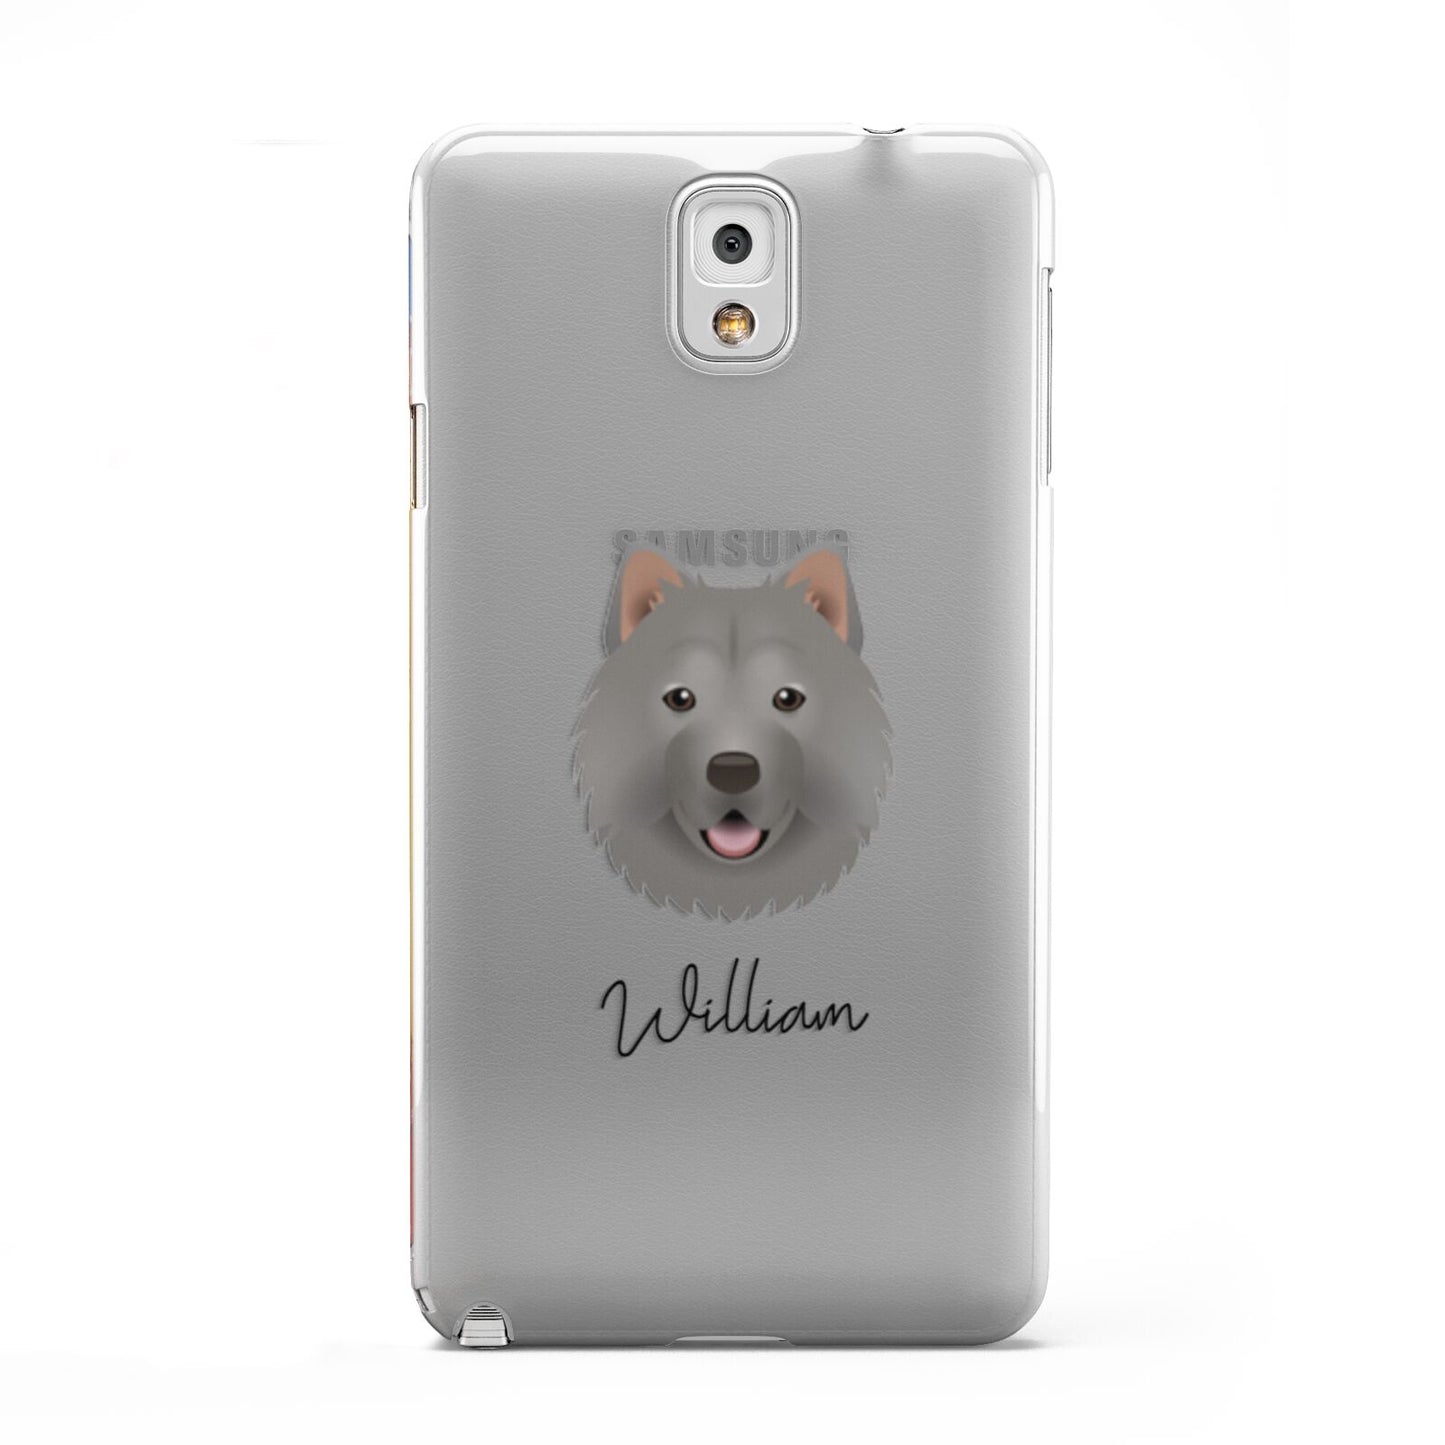 Chusky Personalised Samsung Galaxy Note 3 Case